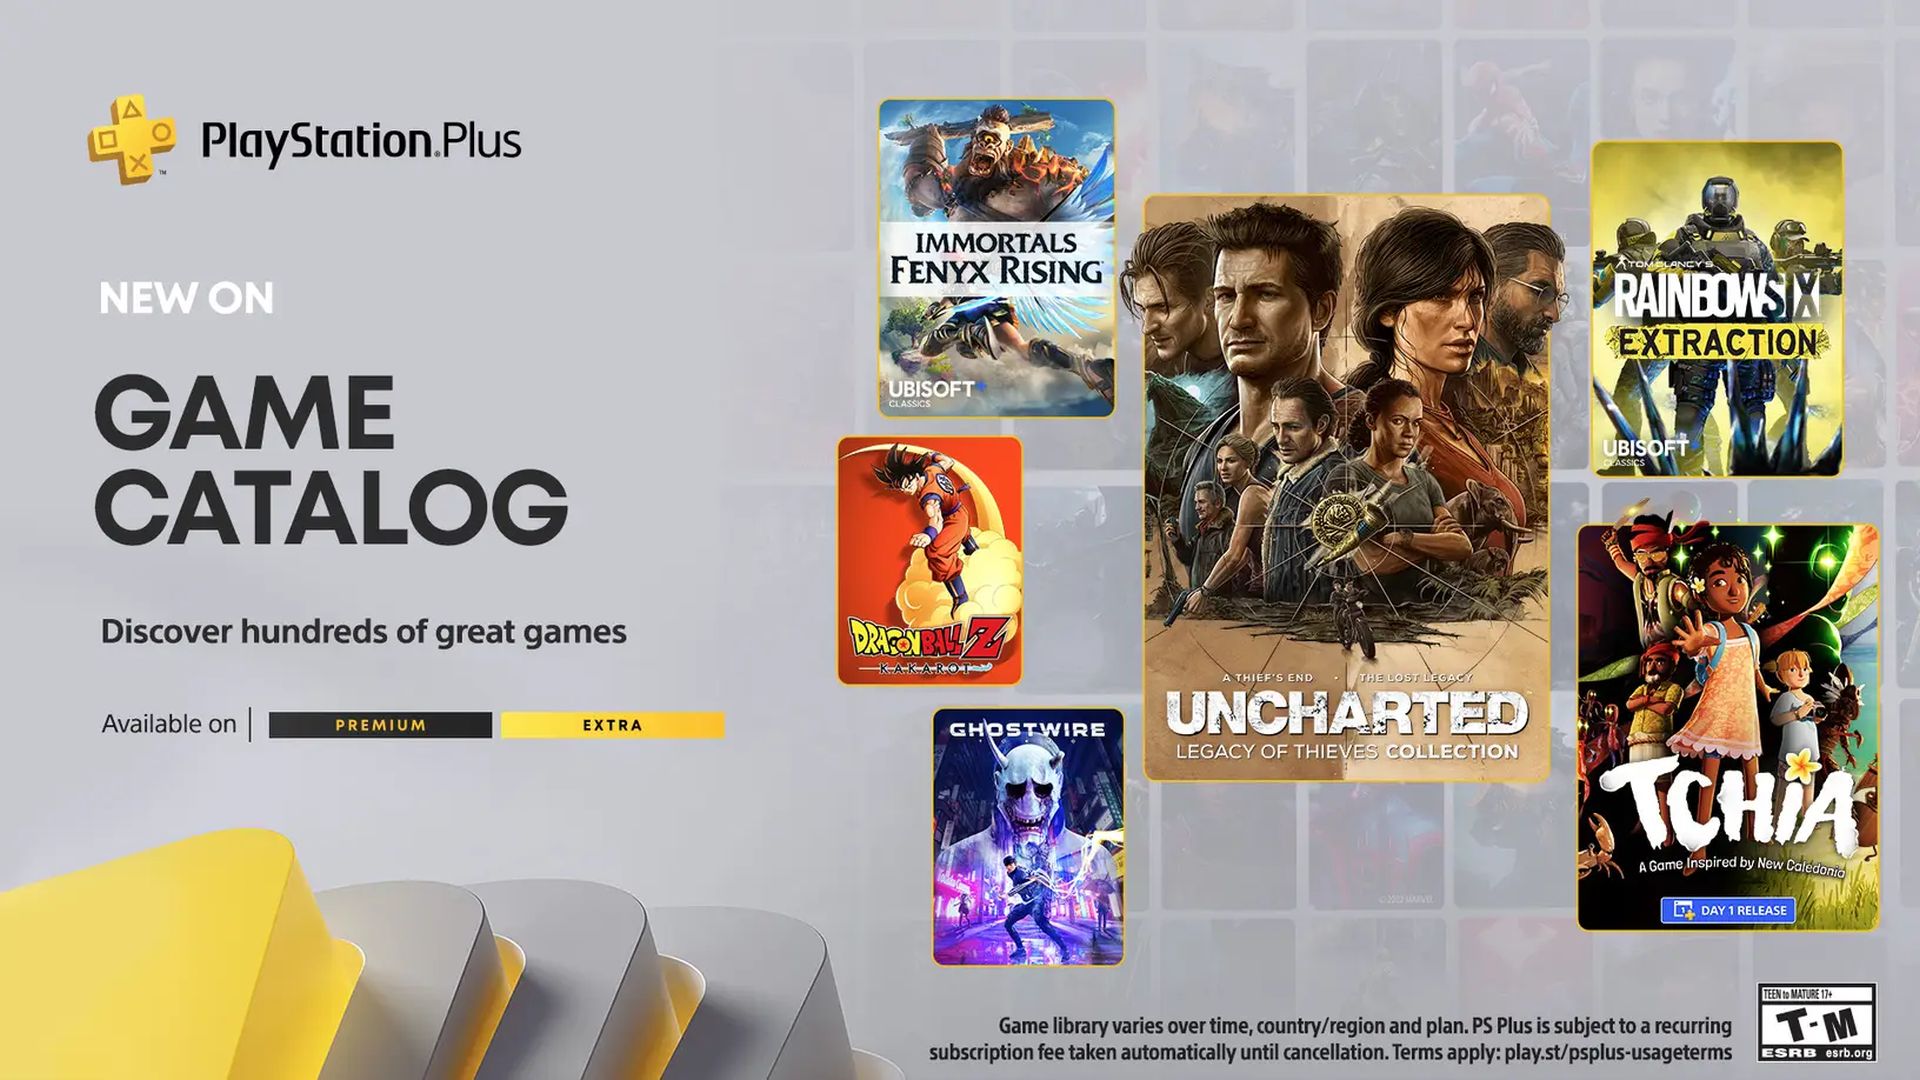 Looks like Uncharted: Legacy of Thieves Collection is coming to